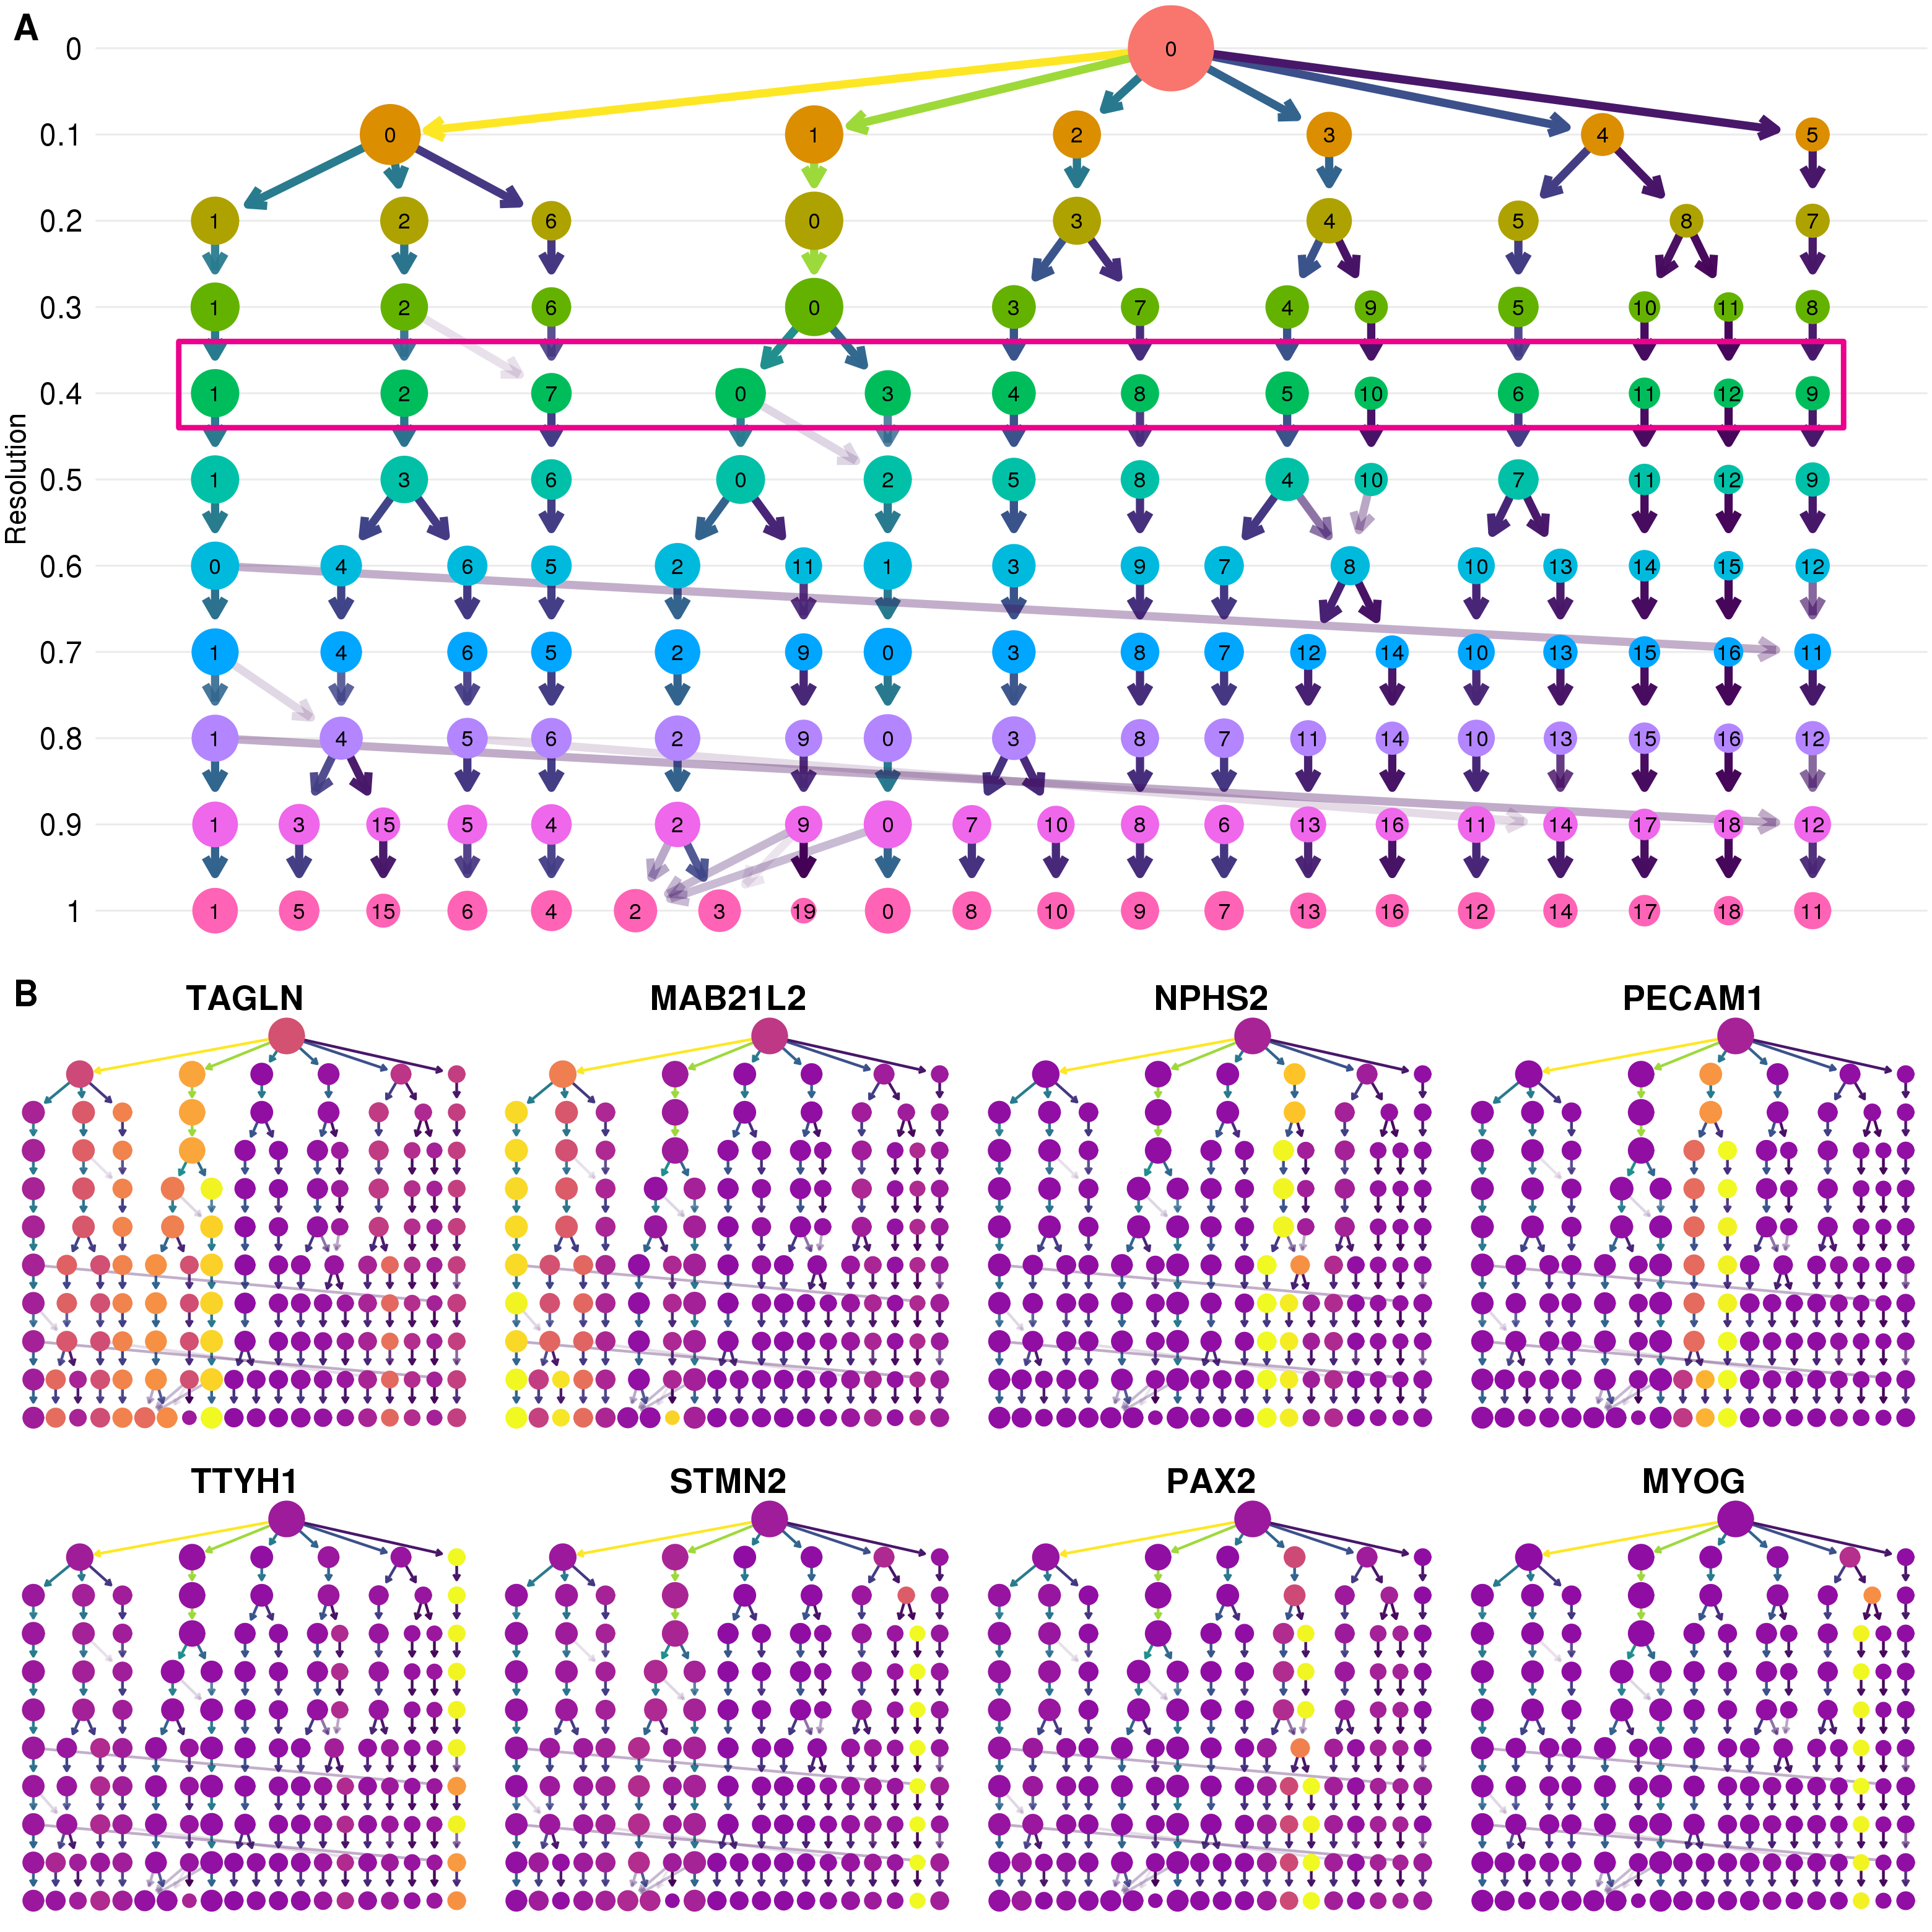 Selecting a clustering resolution. (A) Clustering tree showing resolutions between zero and one. Pink box shows the selected resolution. (B) Clustering trees with nodes coloured by a selection of published marker genes. Expression signals can help to select a clustering resolution.